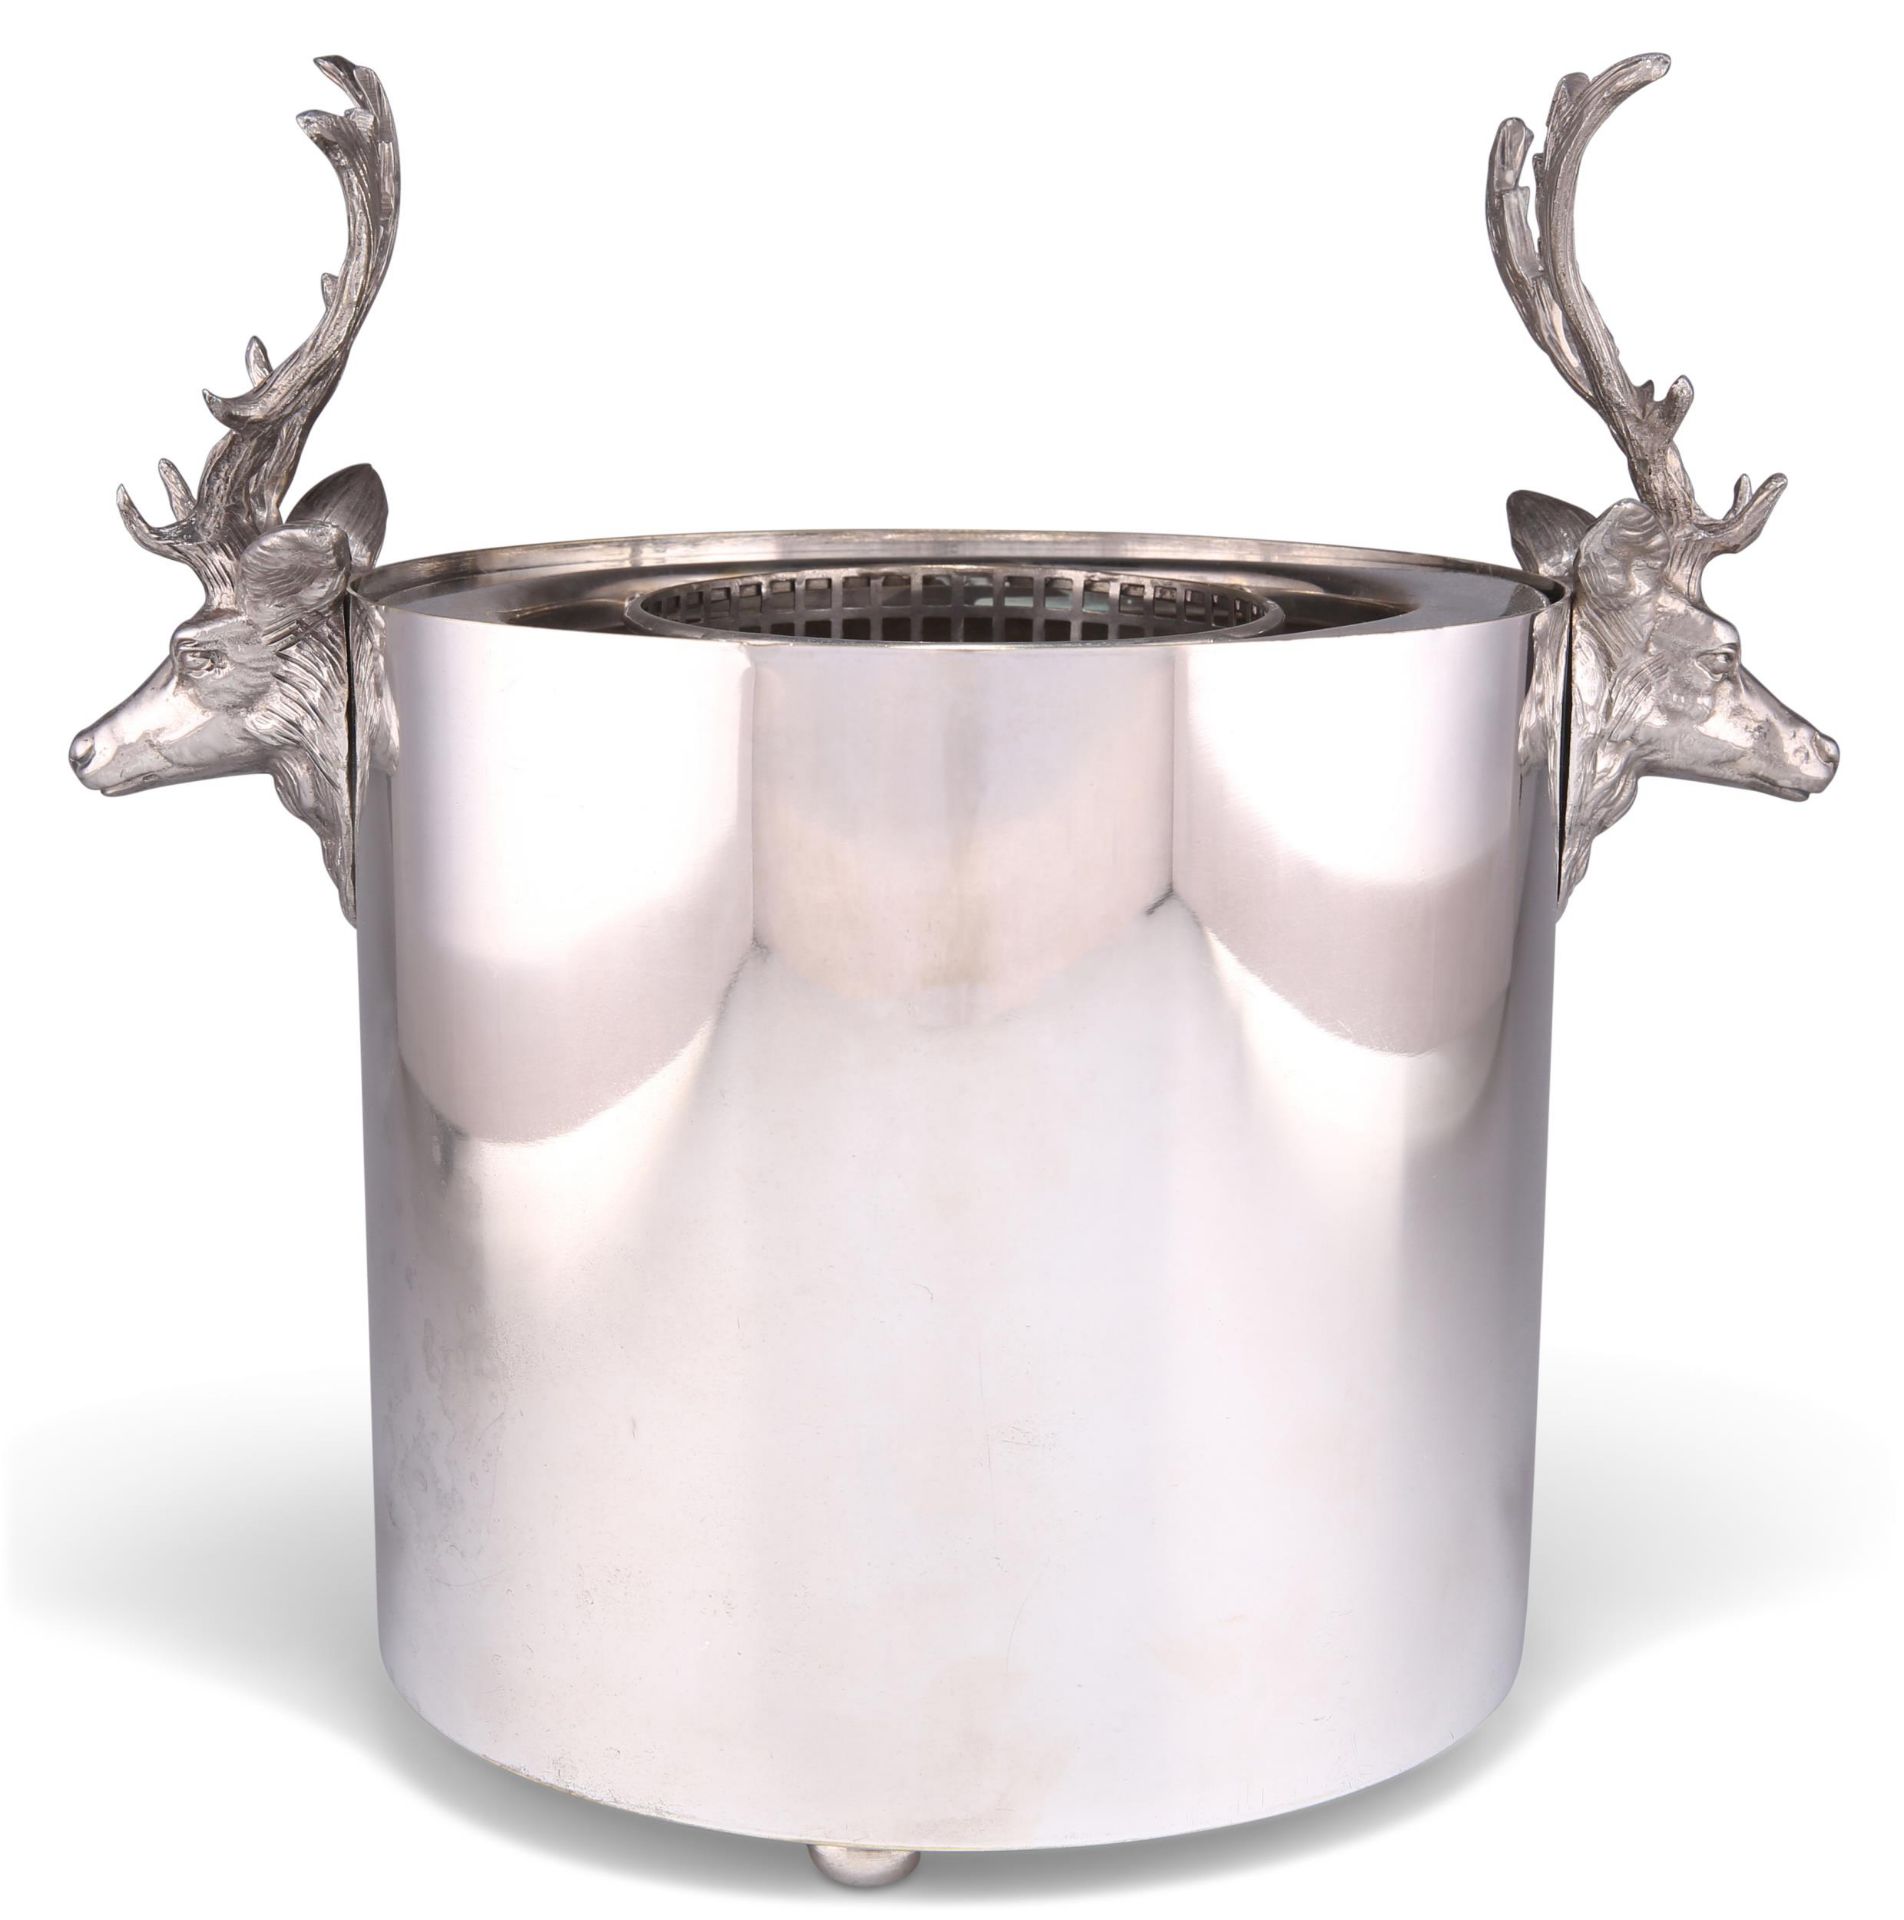 A SILVER-PLATED WINE COOLER